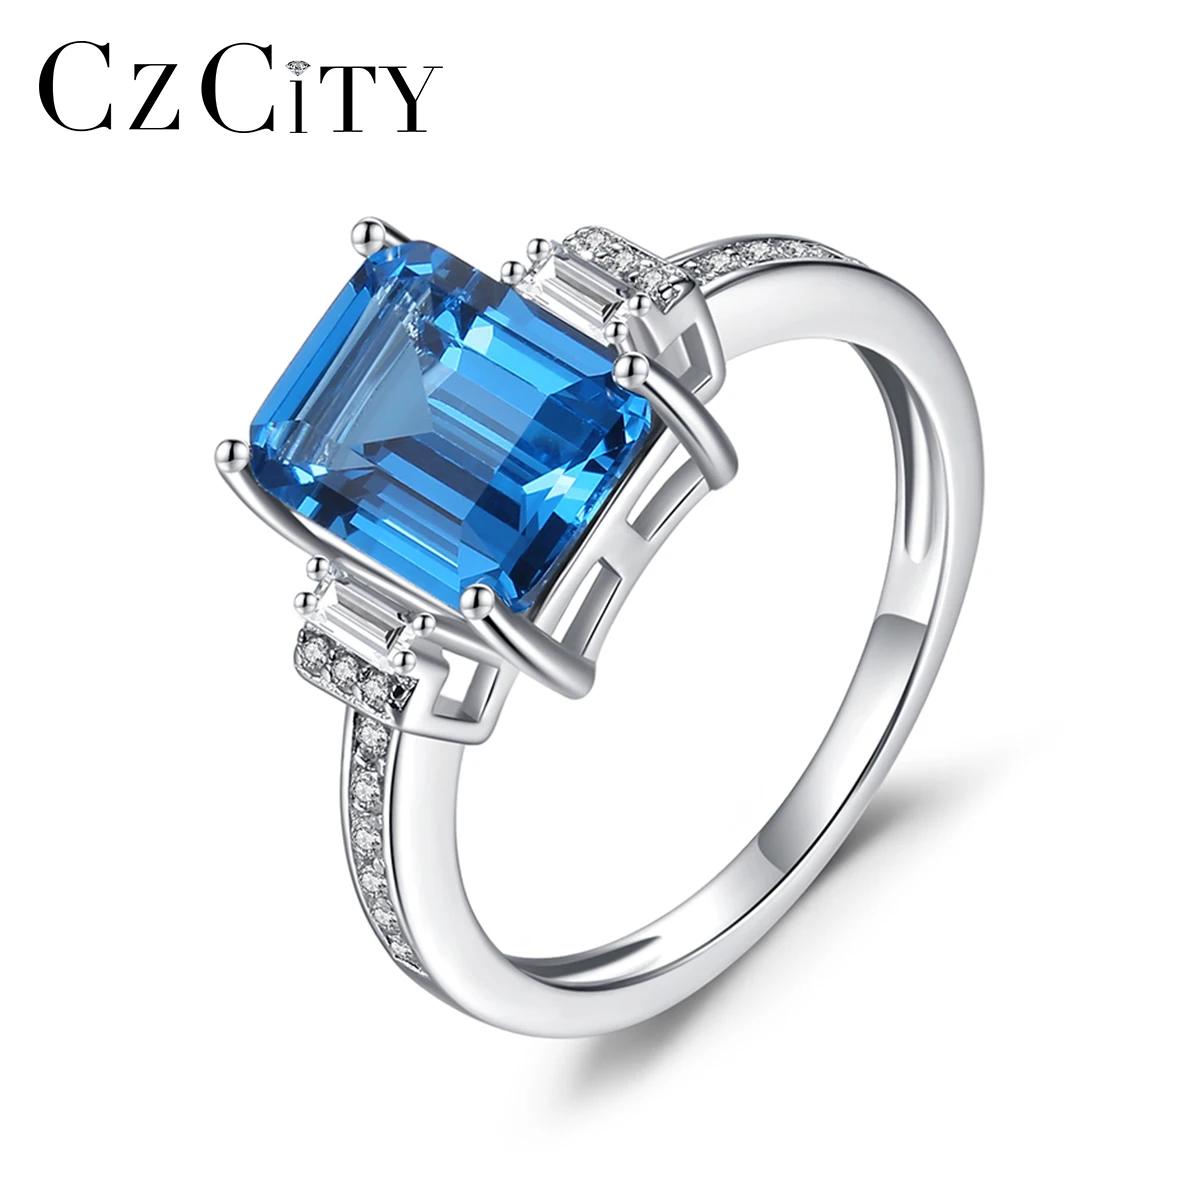 

CZCITY Genuine 925 Sterling Silver Blue Sapphire Ring for Women Engagement Wedding Bridal Gemstone Promise Princess Fine Jewelry